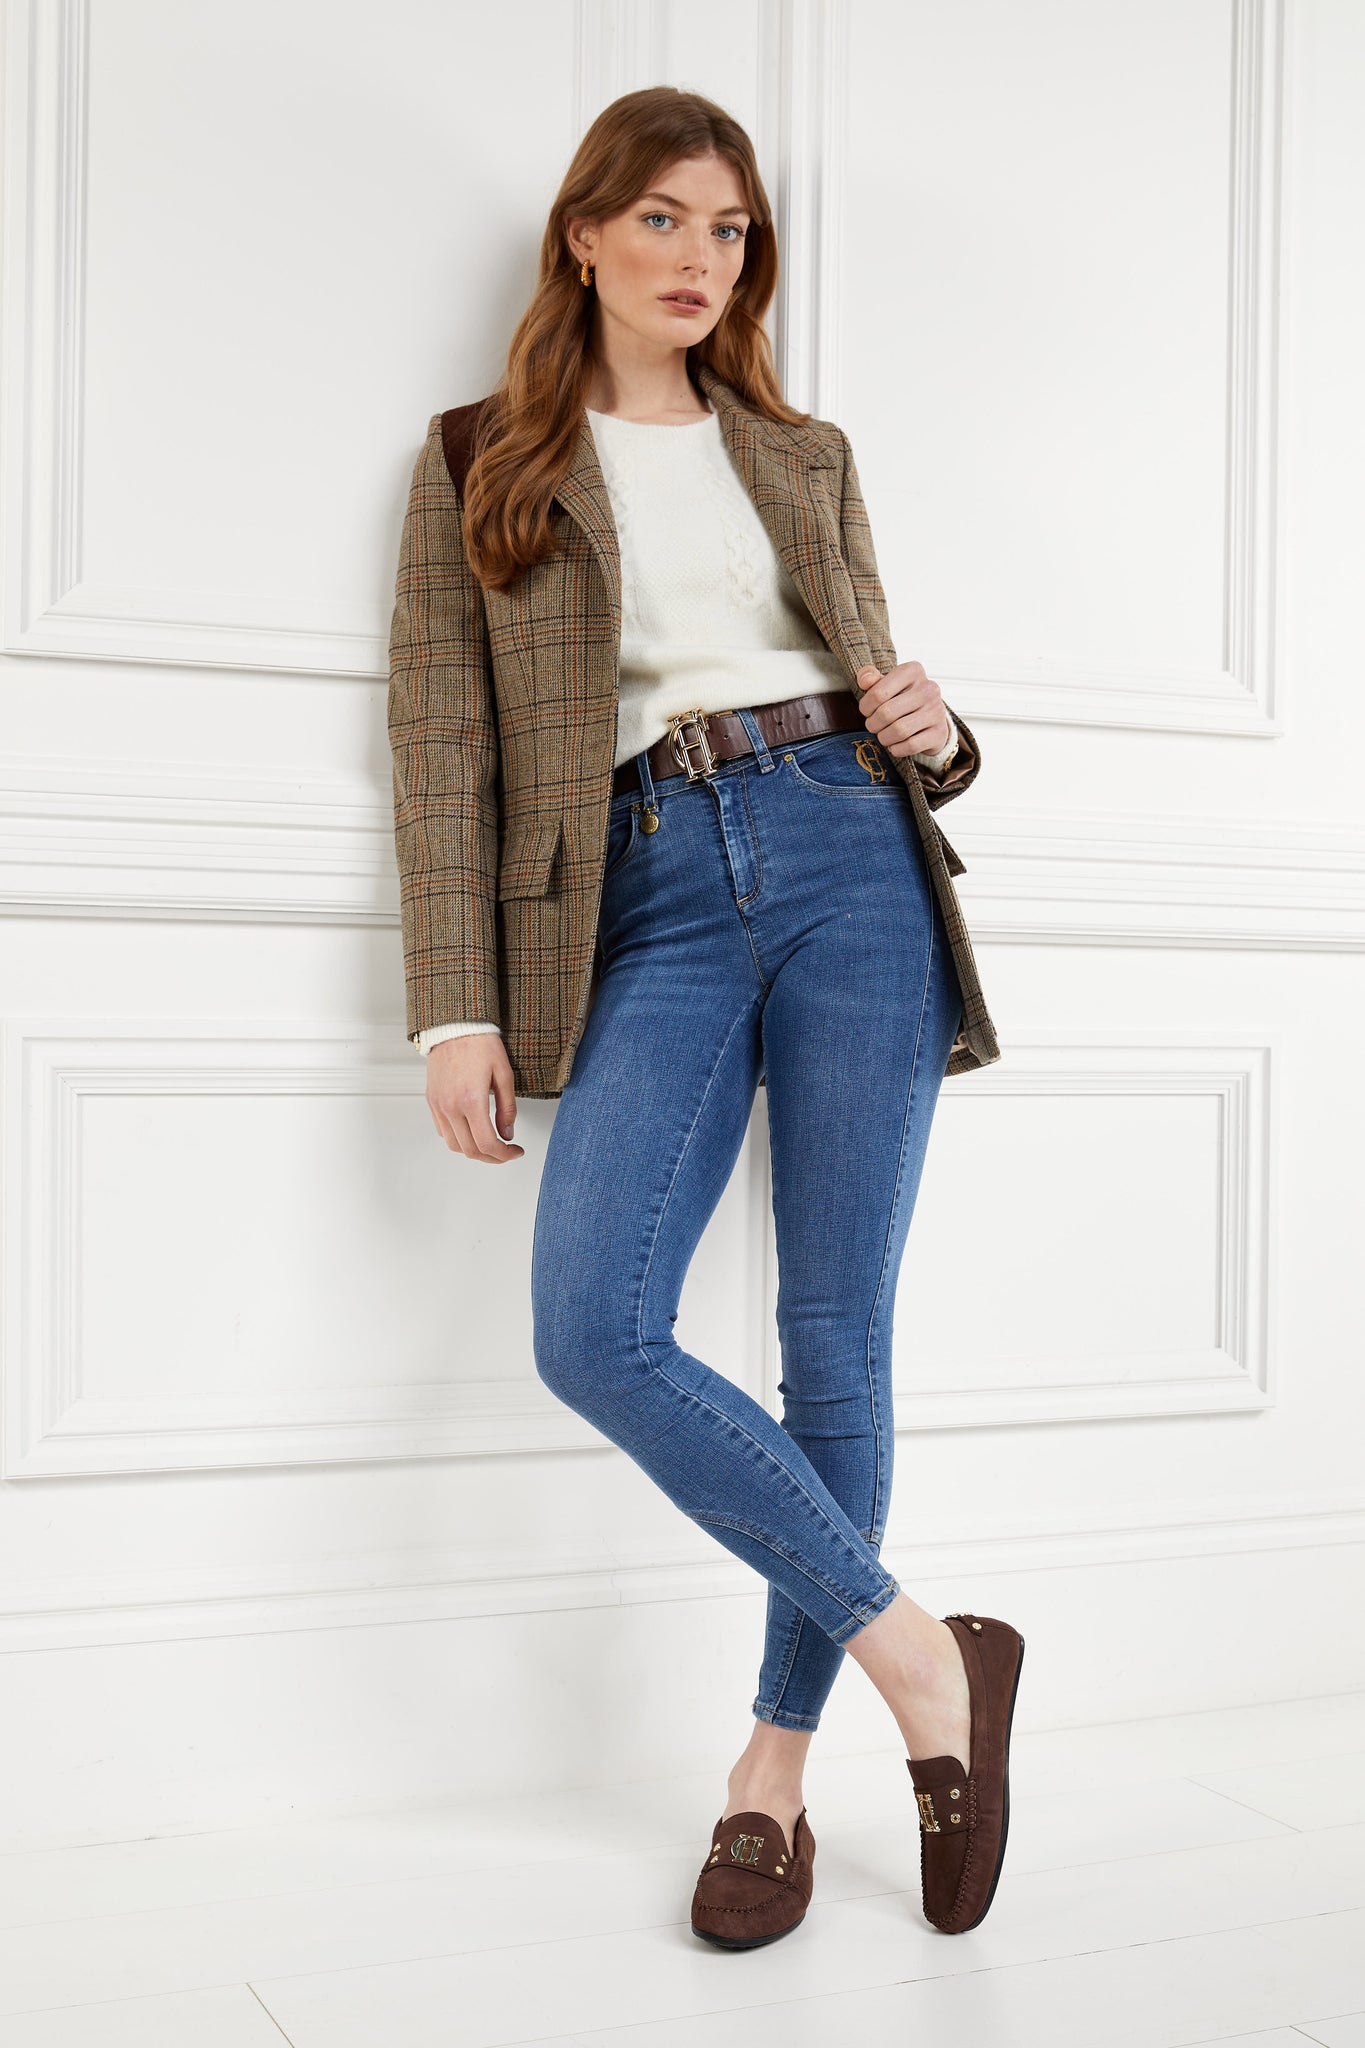 Classic brown suede loafers with a leather sole and top stitching details and gold hardware paired with skinny denim jeans, brown belt, cream crew neck knit and bredon tweed blazer